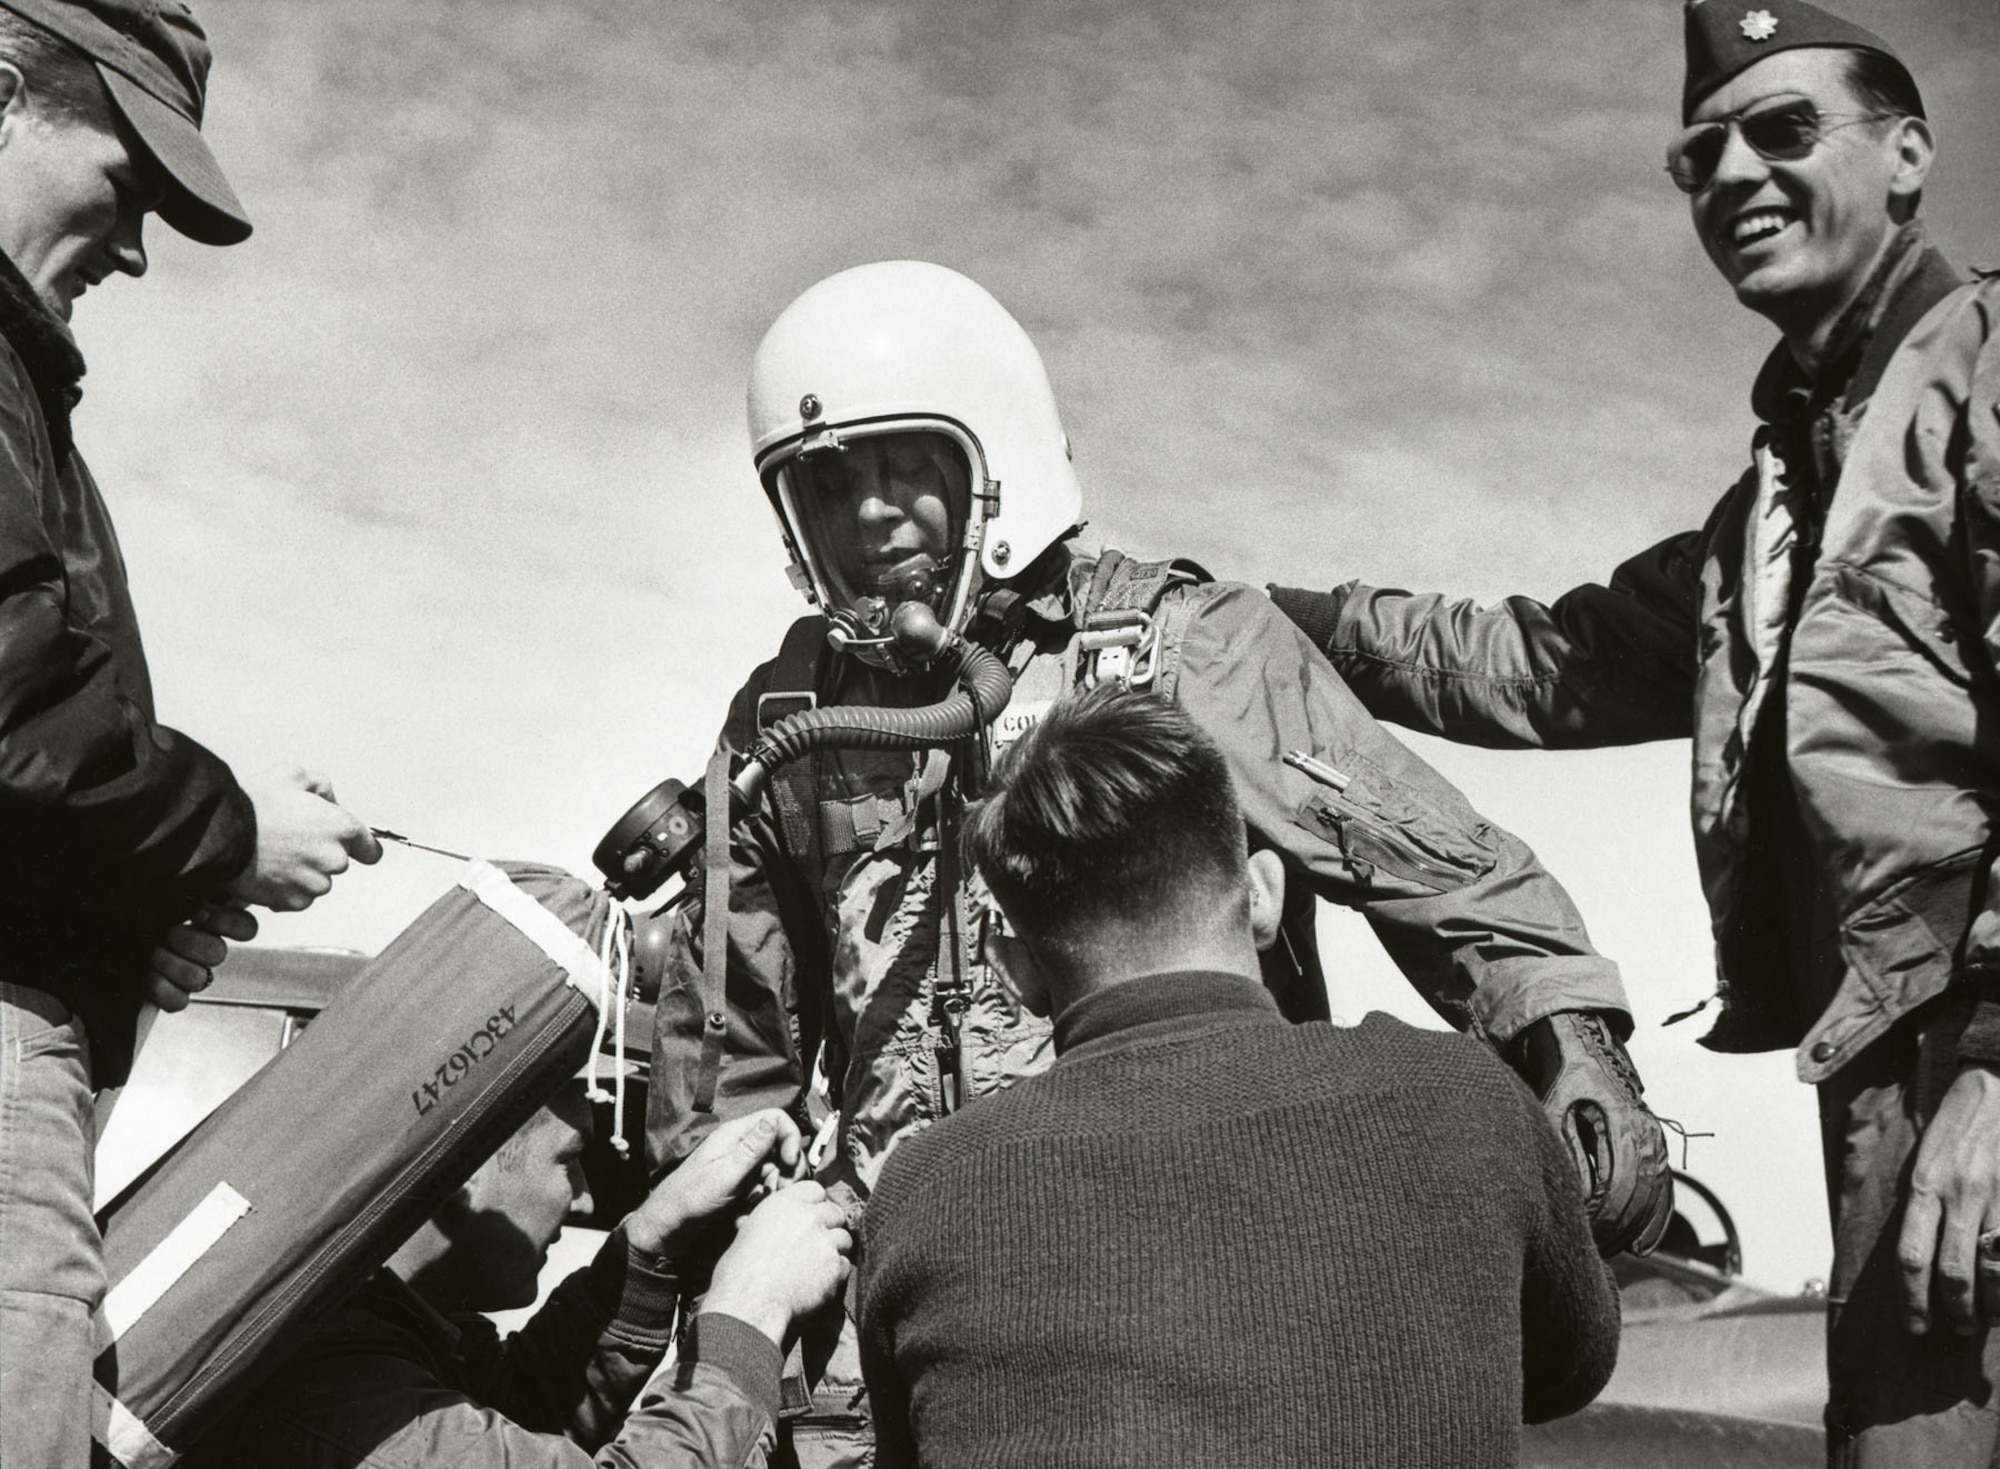 Pilots of early U-2s wore partial pressure suits like this MC-3 suit (worn underneath a standard flying coverall). The aircraft’s cockpit was too small to allow a bulkier but more comfortable full pressure suit. Early U-2s also did not have ejection seats in order to save weight. (U.S. Air Force photo)